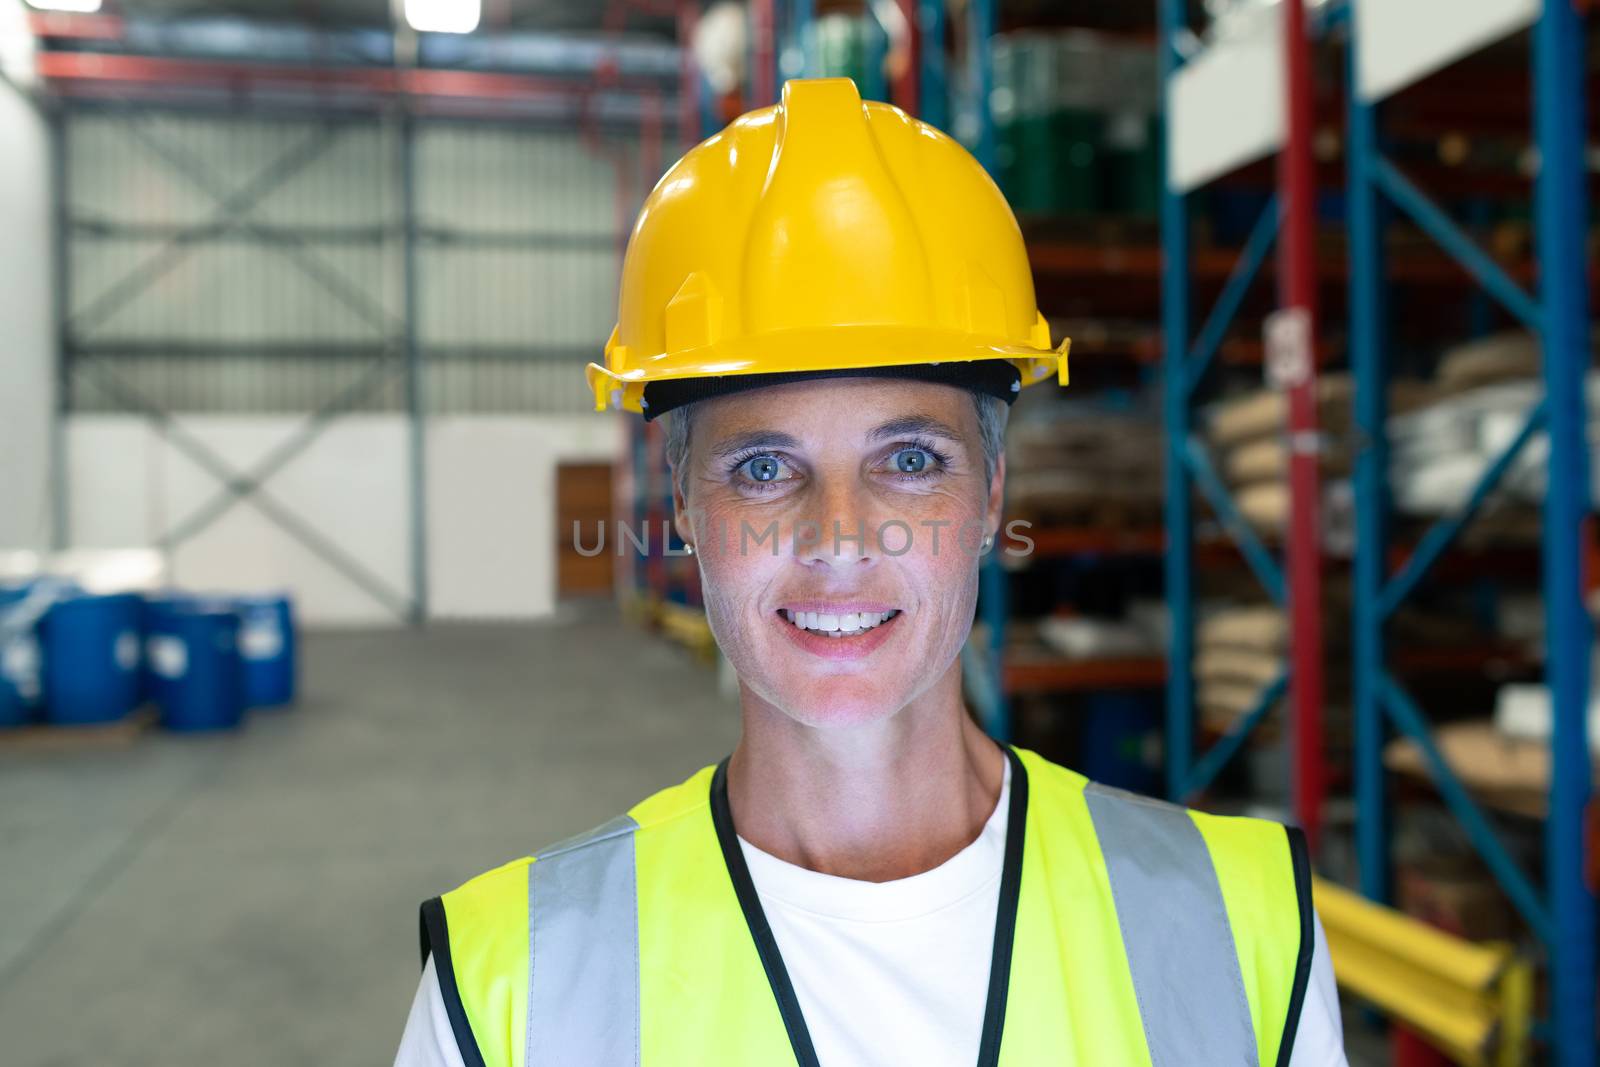 Female staff looking at camera in warehouse by Wavebreakmedia